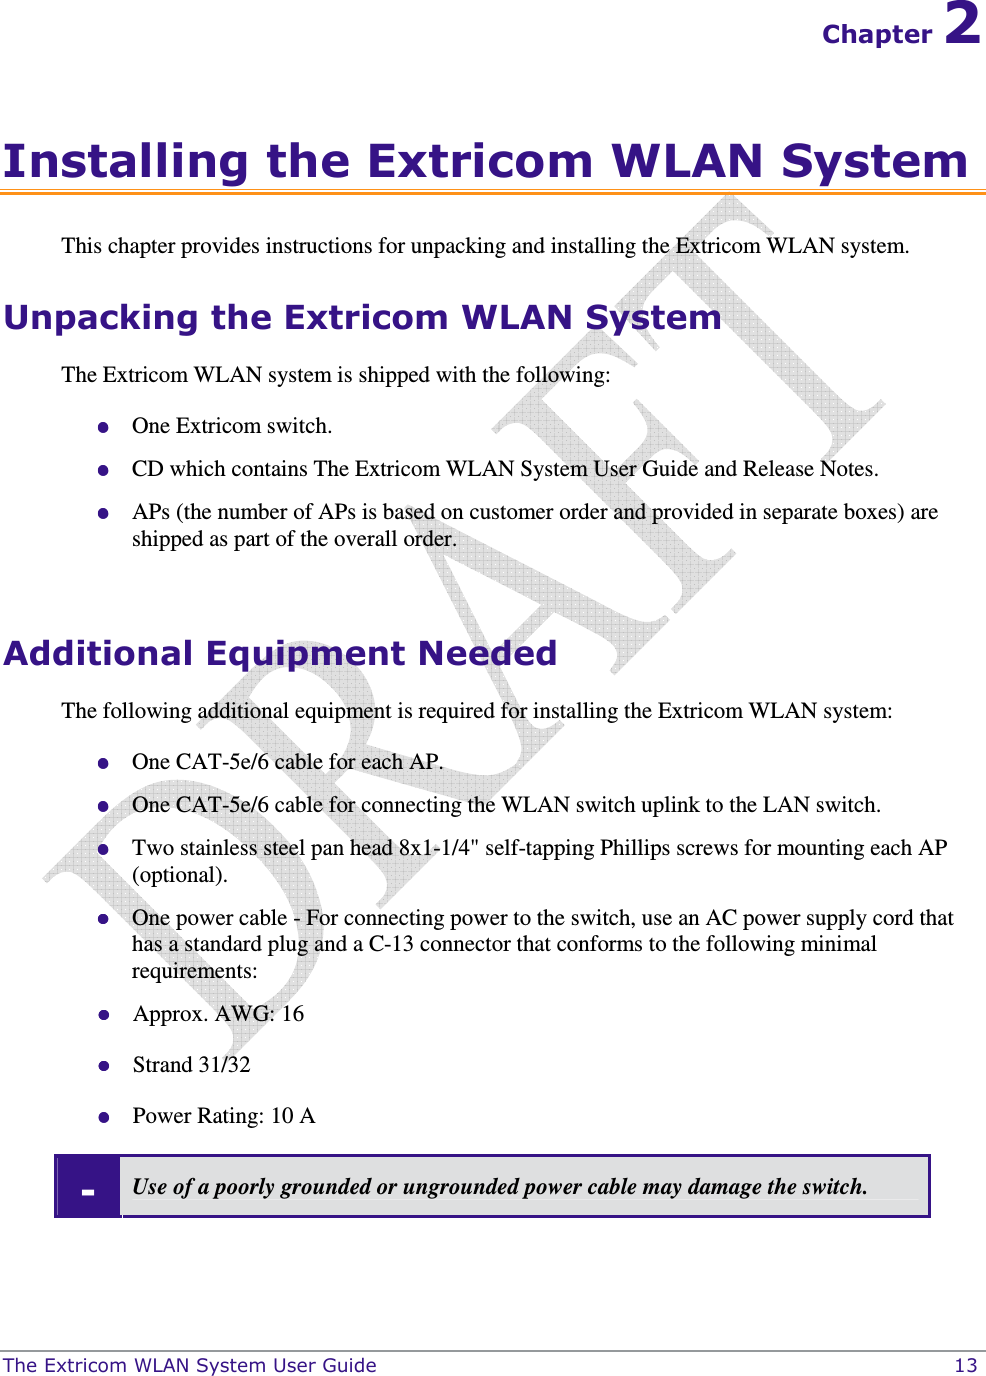  The Extricom WLAN System User Guide    13 Chapter 2 Installing the Extricom WLAN System This chapter provides instructions for unpacking and installing the Extricom WLAN system. Unpacking the Extricom WLAN System The Extricom WLAN system is shipped with the following:  One Extricom switch.  CD which contains The Extricom WLAN System User Guide and Release Notes.  APs (the number of APs is based on customer order and provided in separate boxes) are shipped as part of the overall order.  Additional Equipment Needed The following additional equipment is required for installing the Extricom WLAN system:  One CAT-5e/6 cable for each AP.  One CAT-5e/6 cable for connecting the WLAN switch uplink to the LAN switch.  Two stainless steel pan head 8x1-1/4&quot; self-tapping Phillips screws for mounting each AP (optional).  One power cable - For connecting power to the switch, use an AC power supply cord that has a standard plug and a C-13 connector that conforms to the following minimal requirements:   Approx. AWG: 16  Strand 31/32  Power Rating: 10 A - Use of a poorly grounded or ungrounded power cable may damage the switch.  